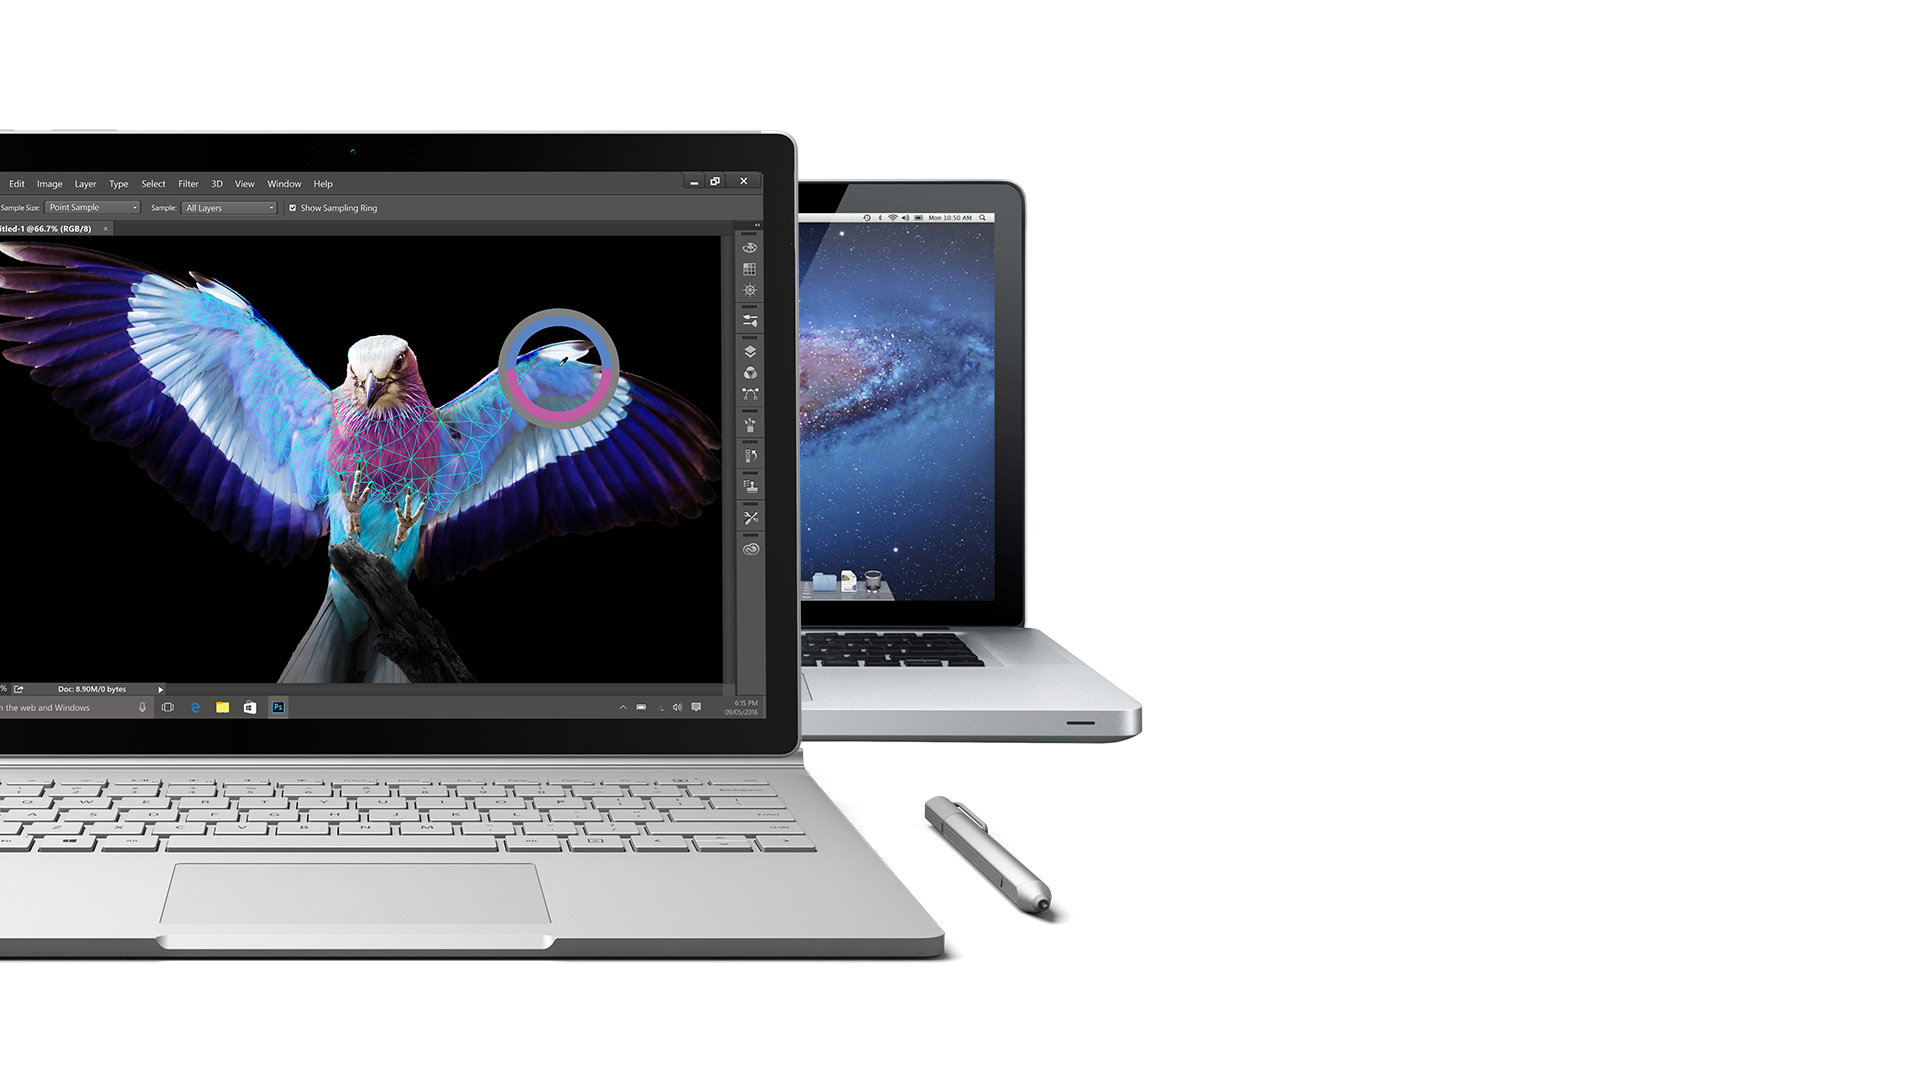 Surface Book open facing front with Surface Pen and a MacBook Pro in the background